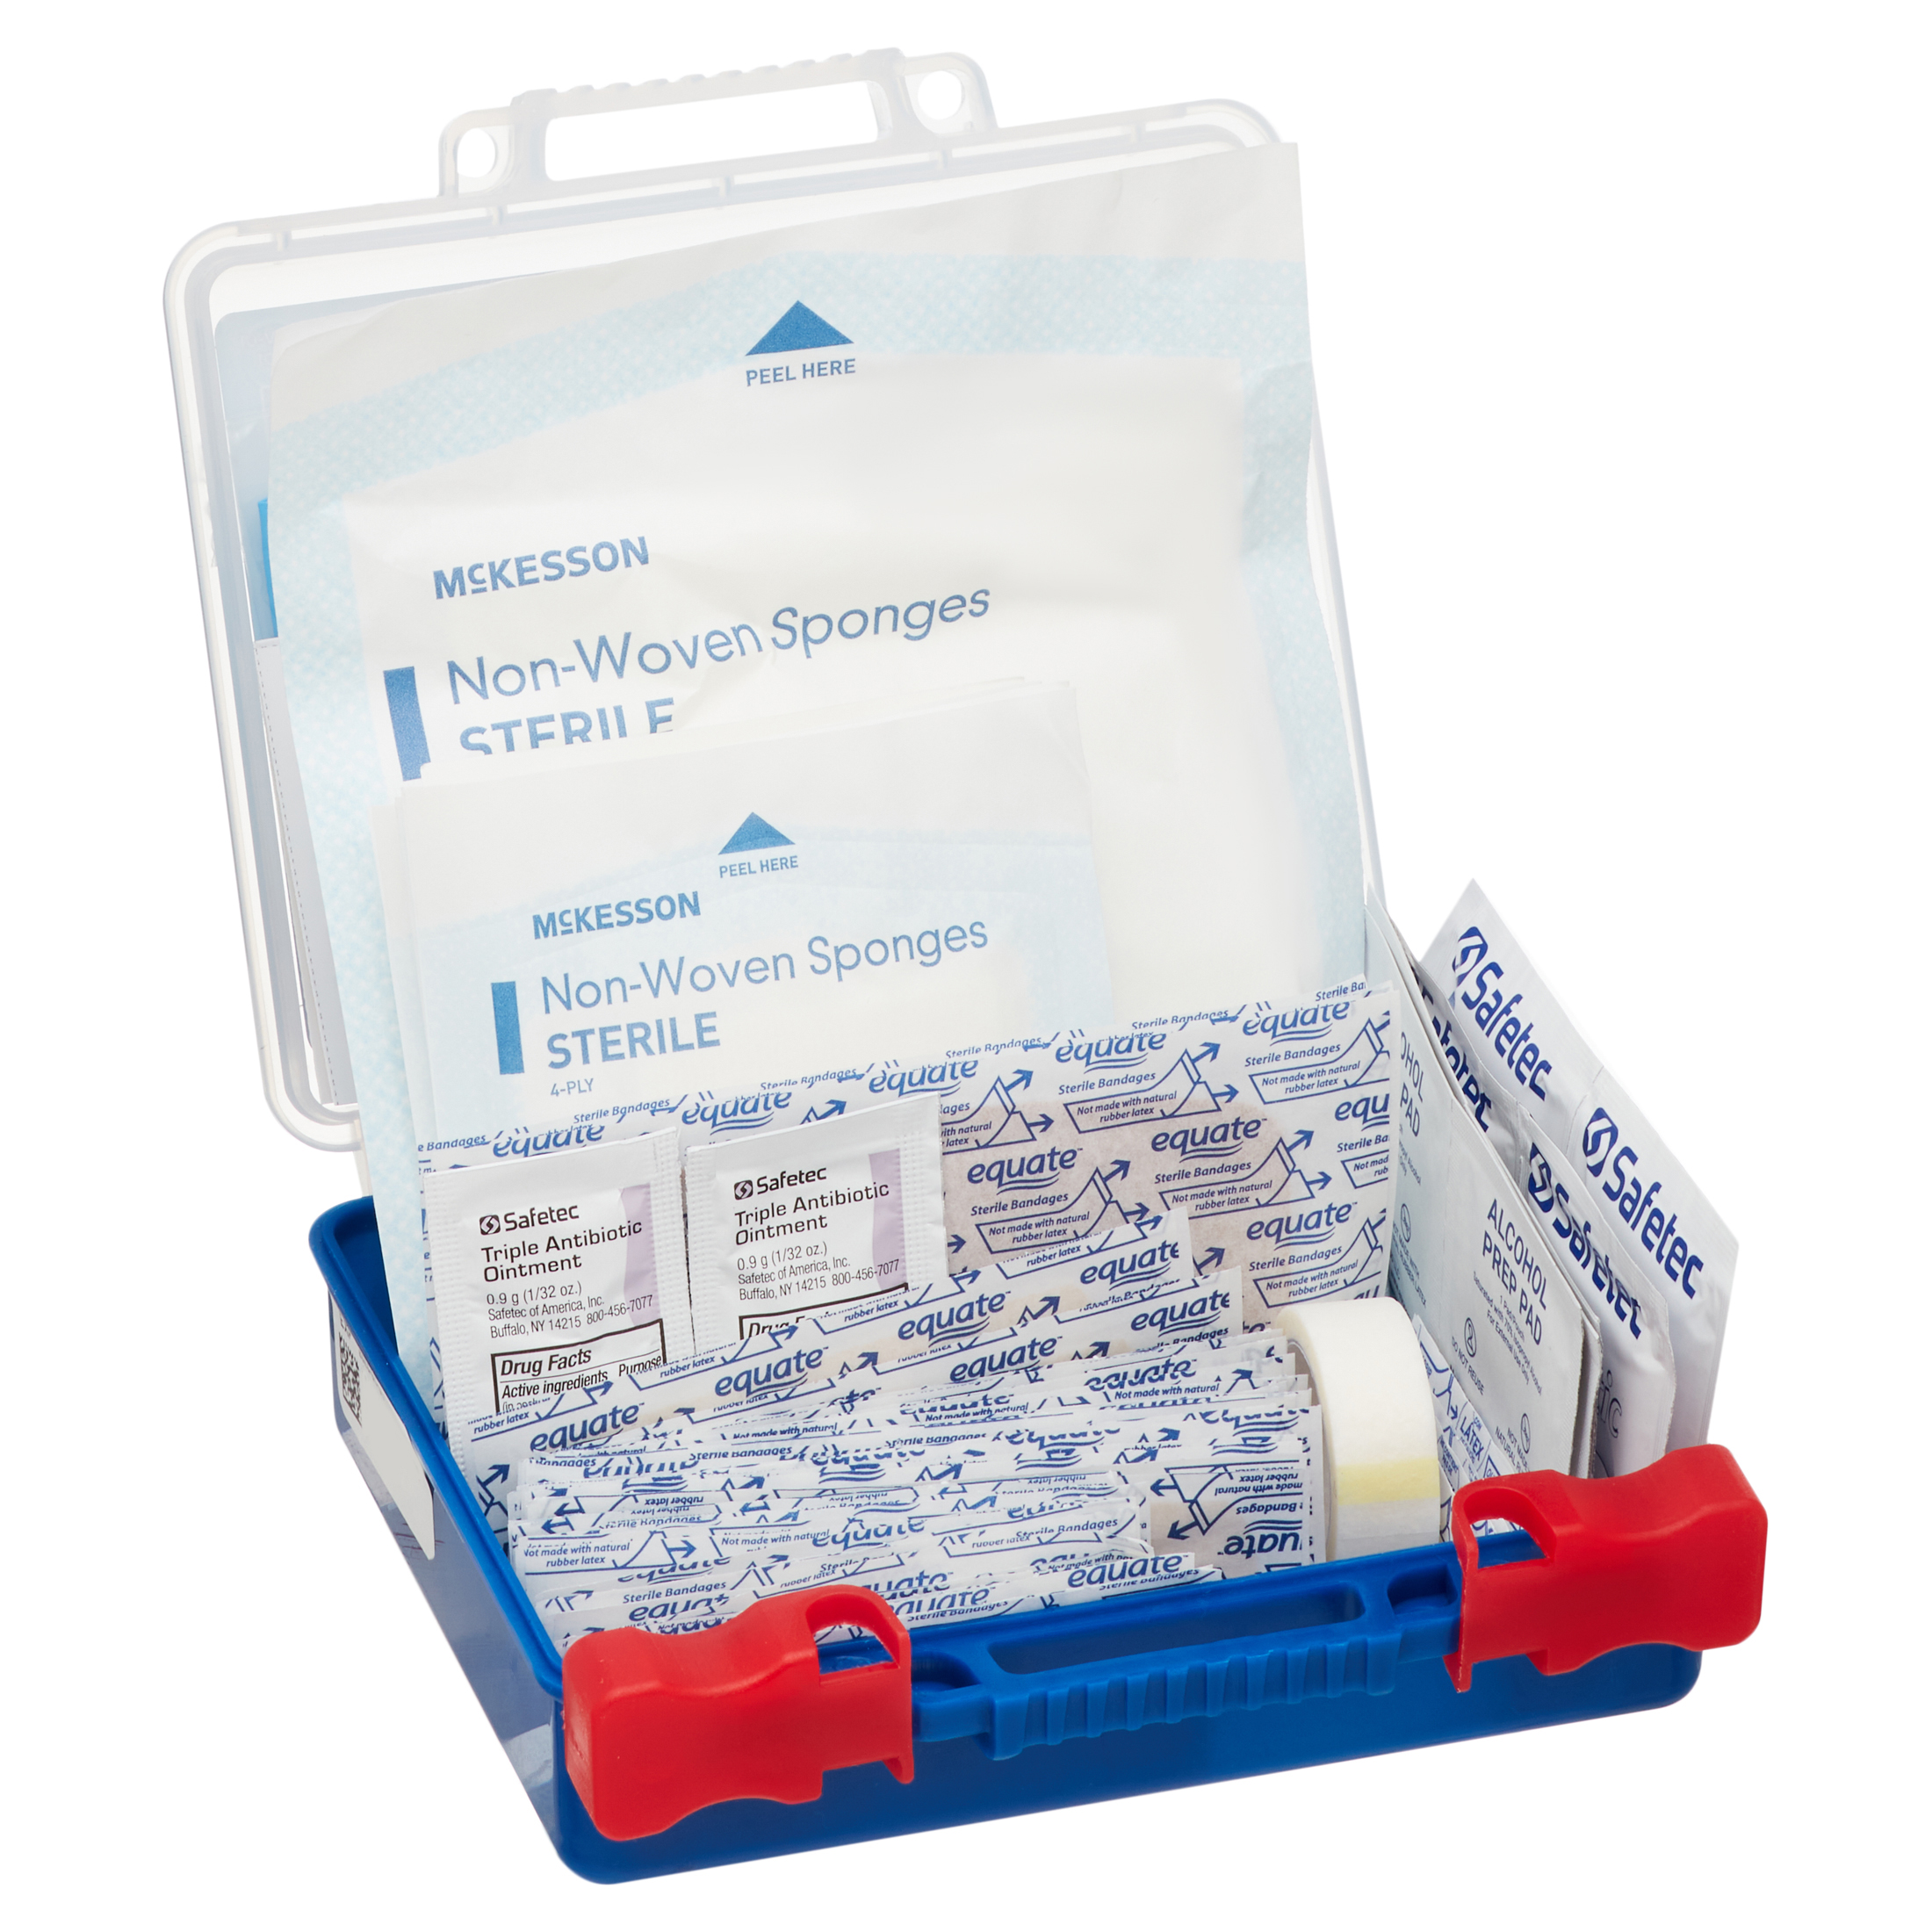 Equate On-The-Go First Aid Kit, 85 Items - image 7 of 9